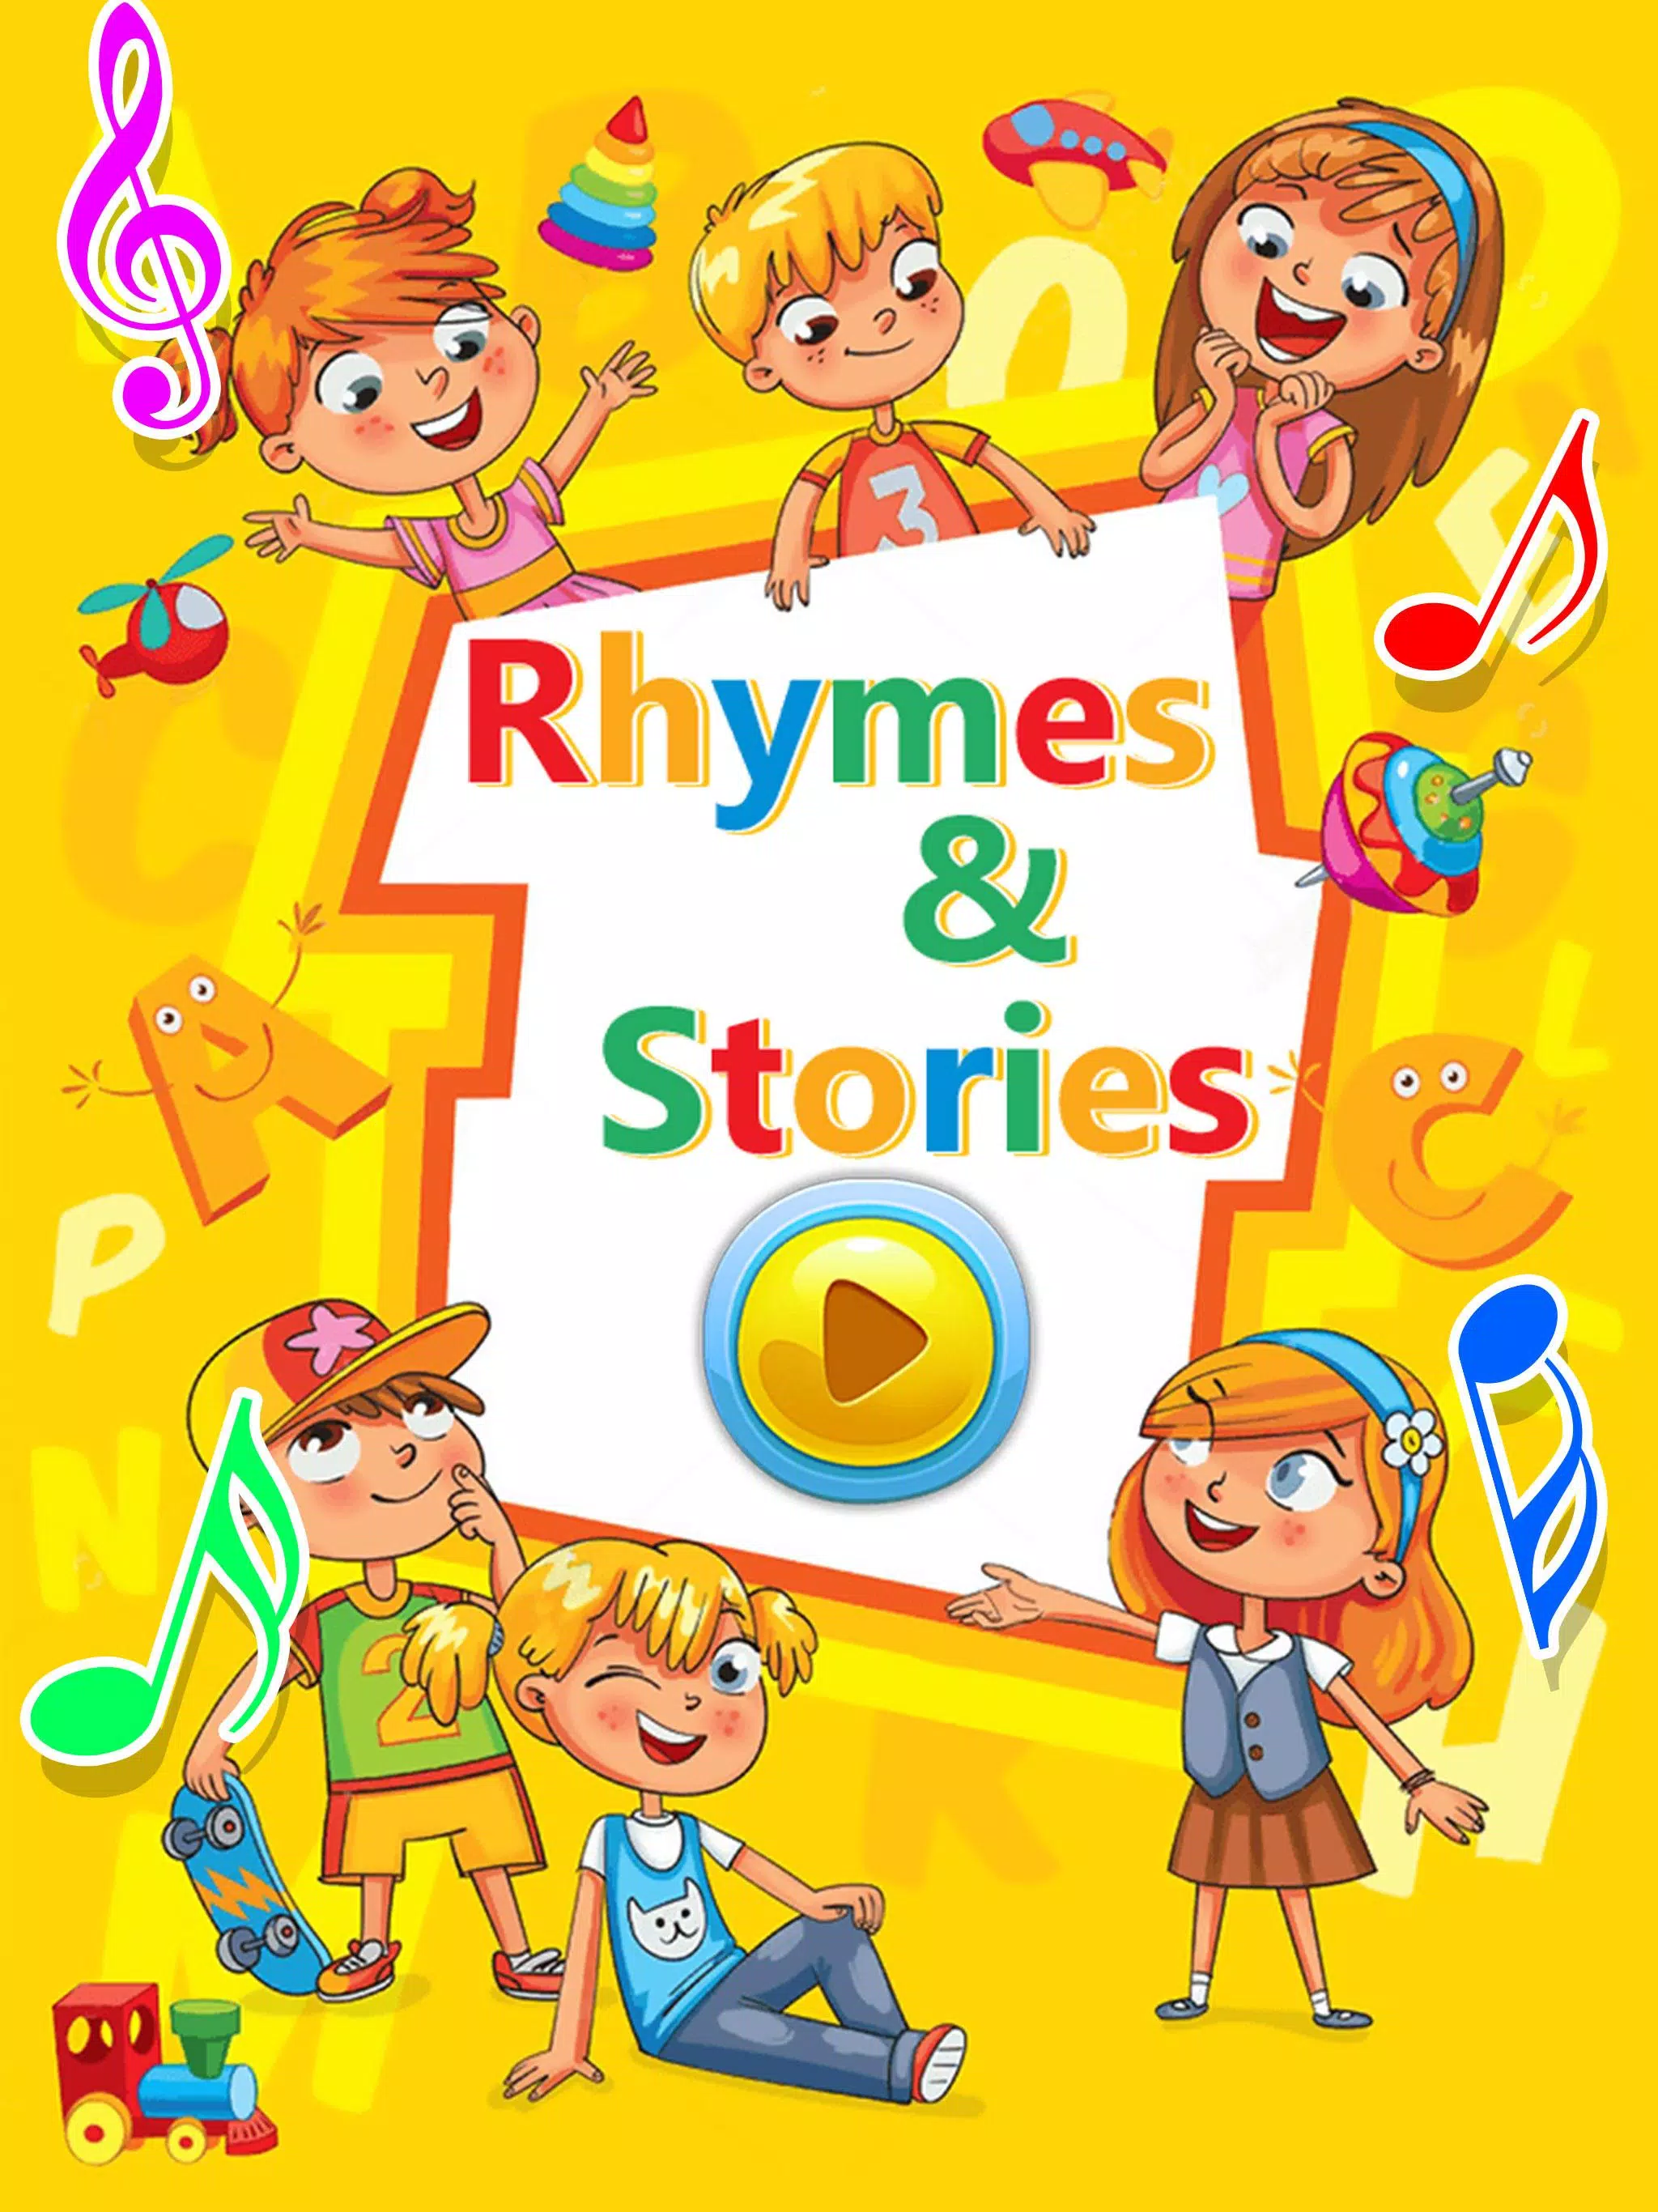 Nursery Rhymes & Stories For Kids, Preschool Game for Android ...